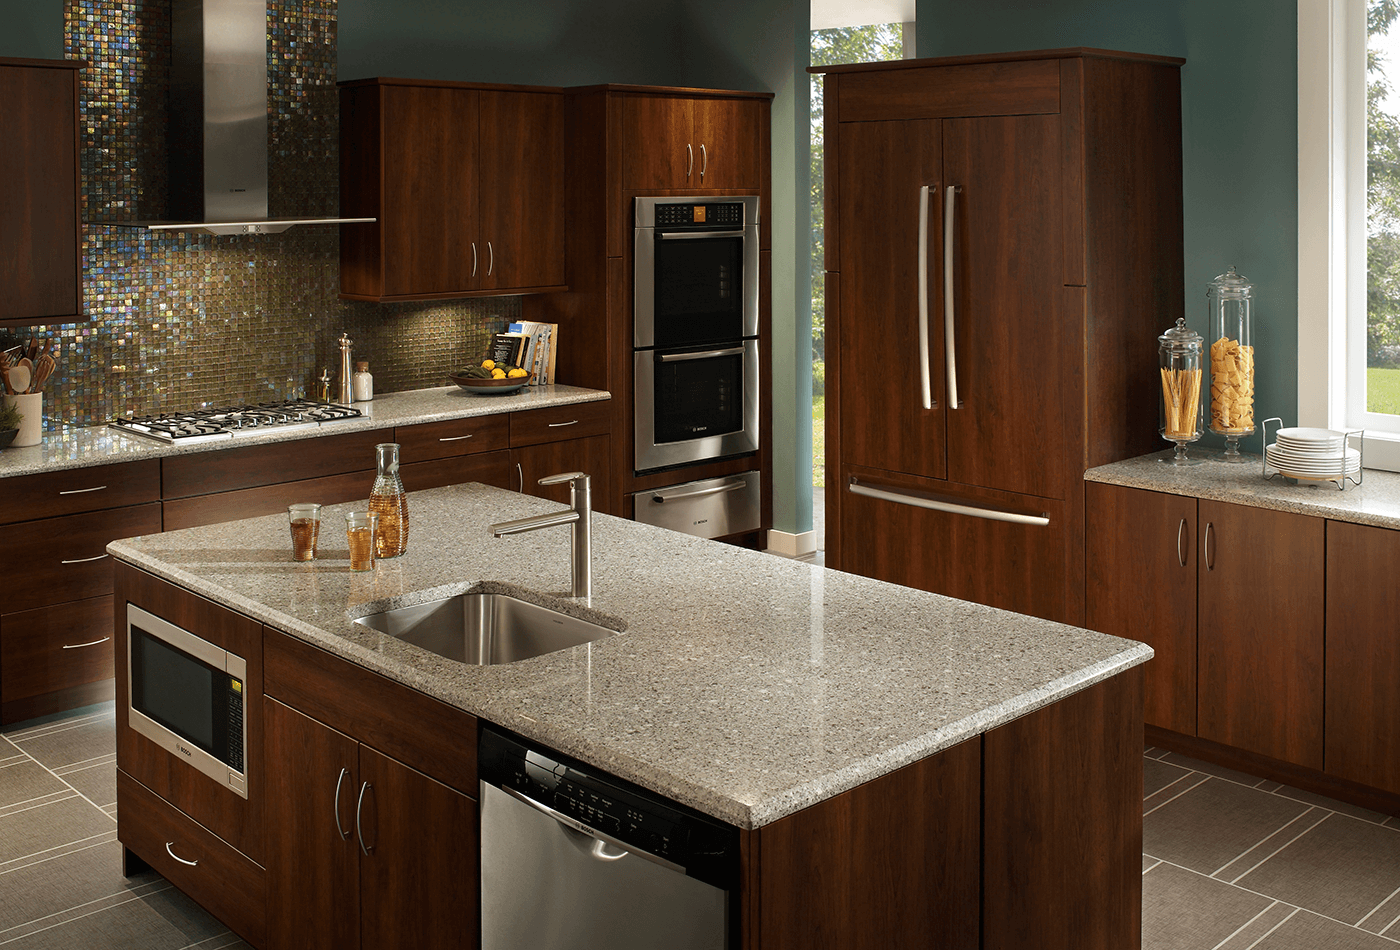 Are Silestone Countertops for Your Kitchen